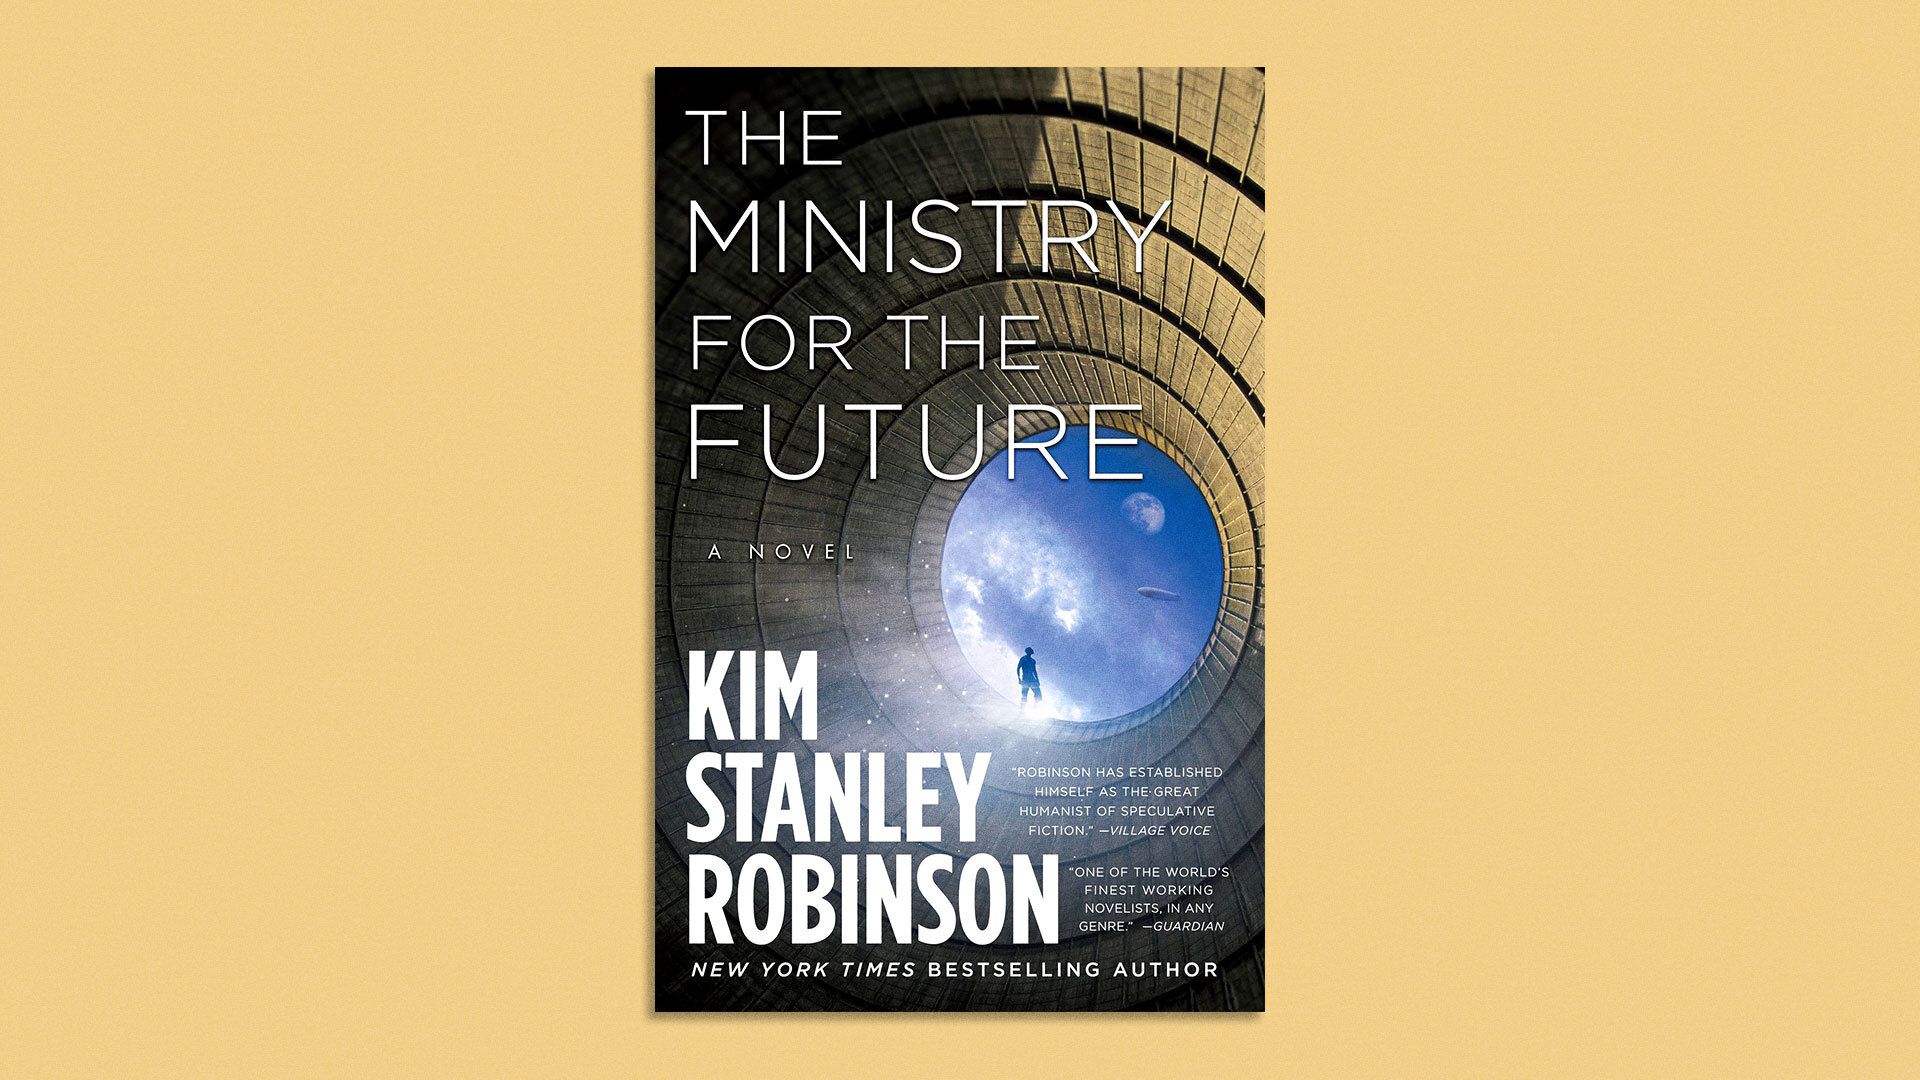 Image of the cover of "The Ministry for the Future"